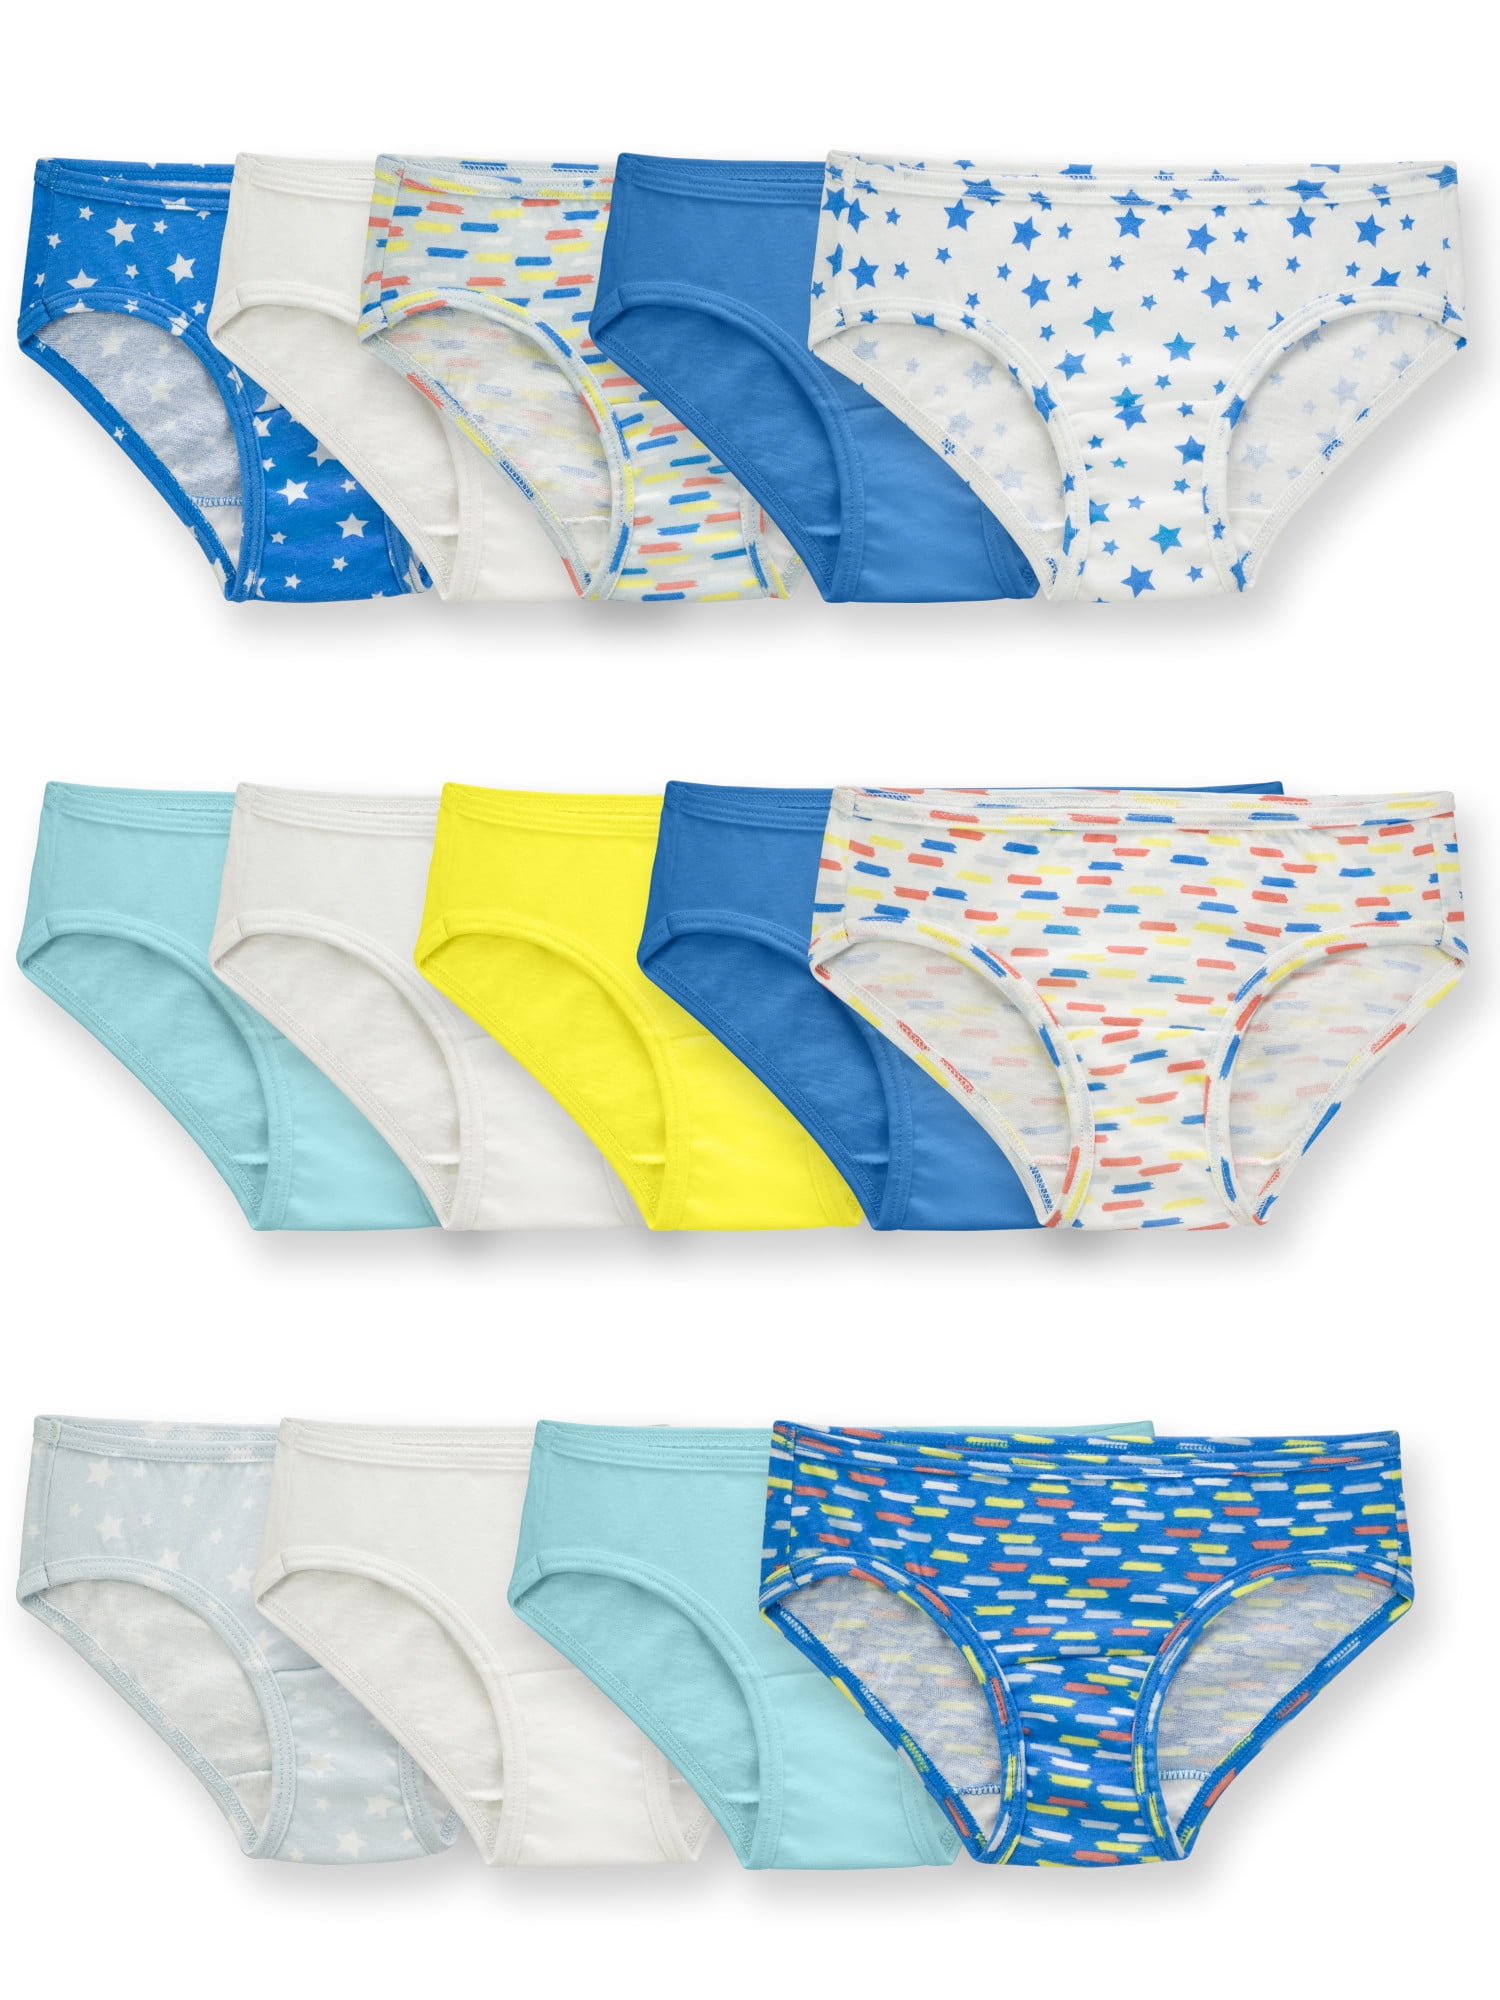 Fruit of the Loom Girls' Assorted Cotton Hipster Underwear, 14 Pack Panties  Sizes 4 - 14